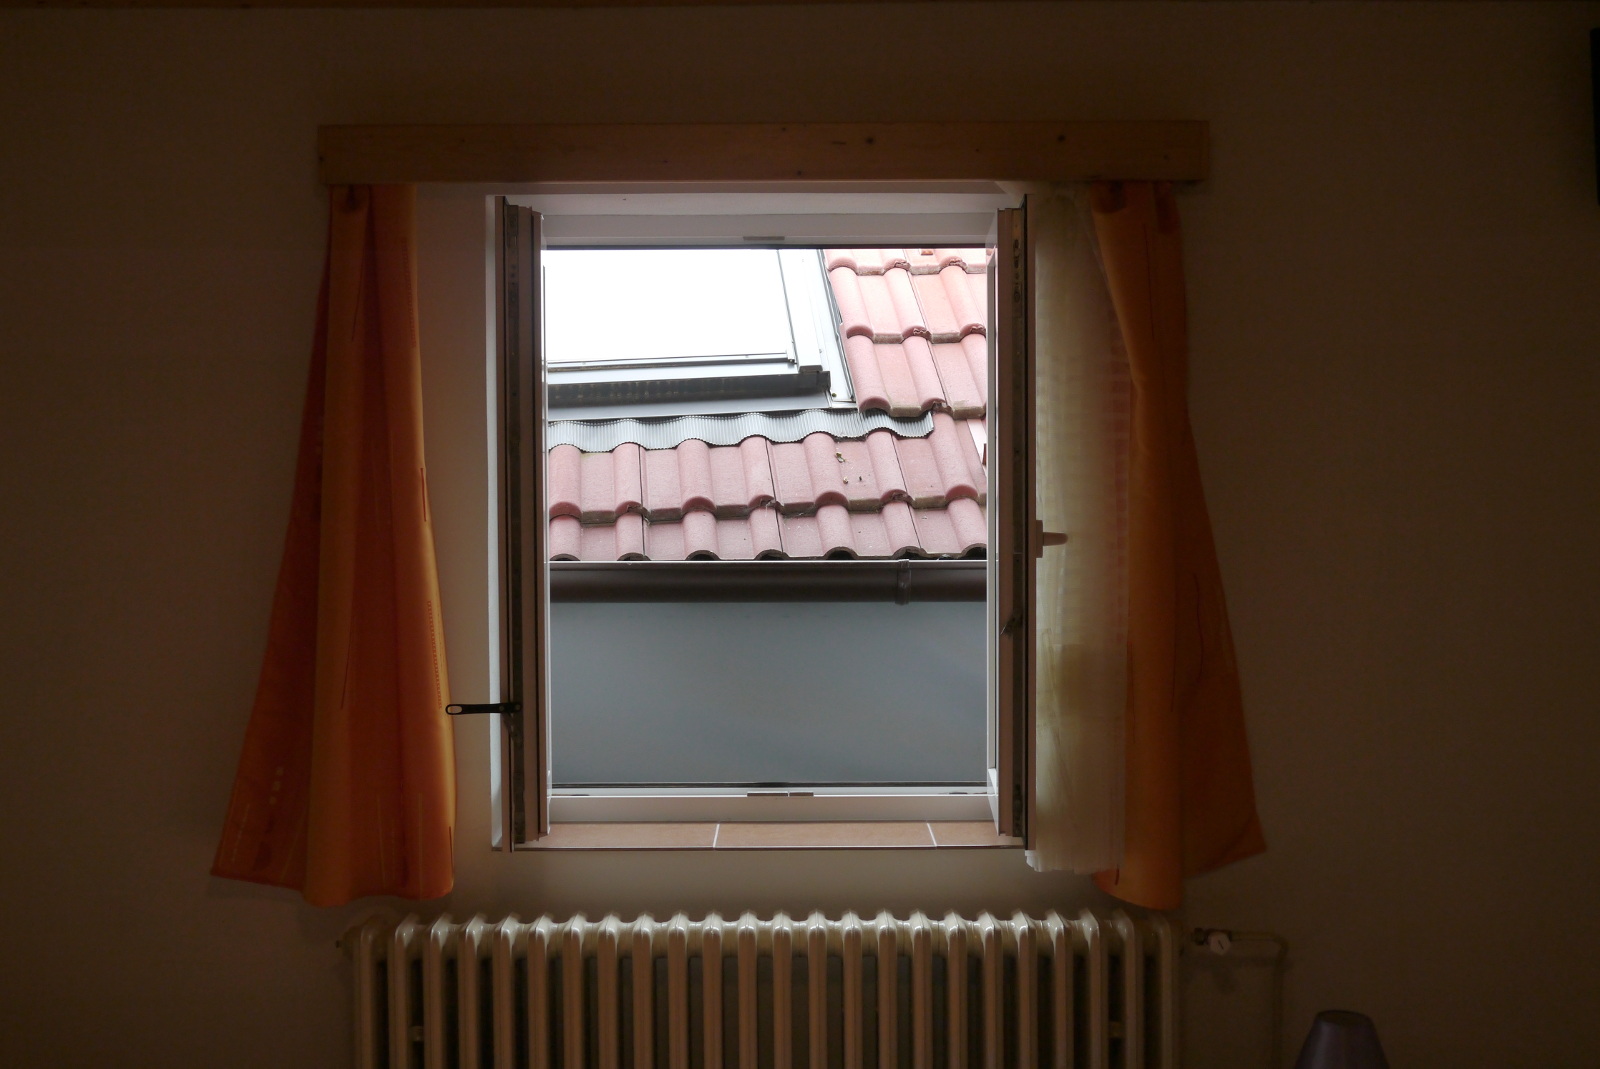 There was a roof in front of the window in my room.